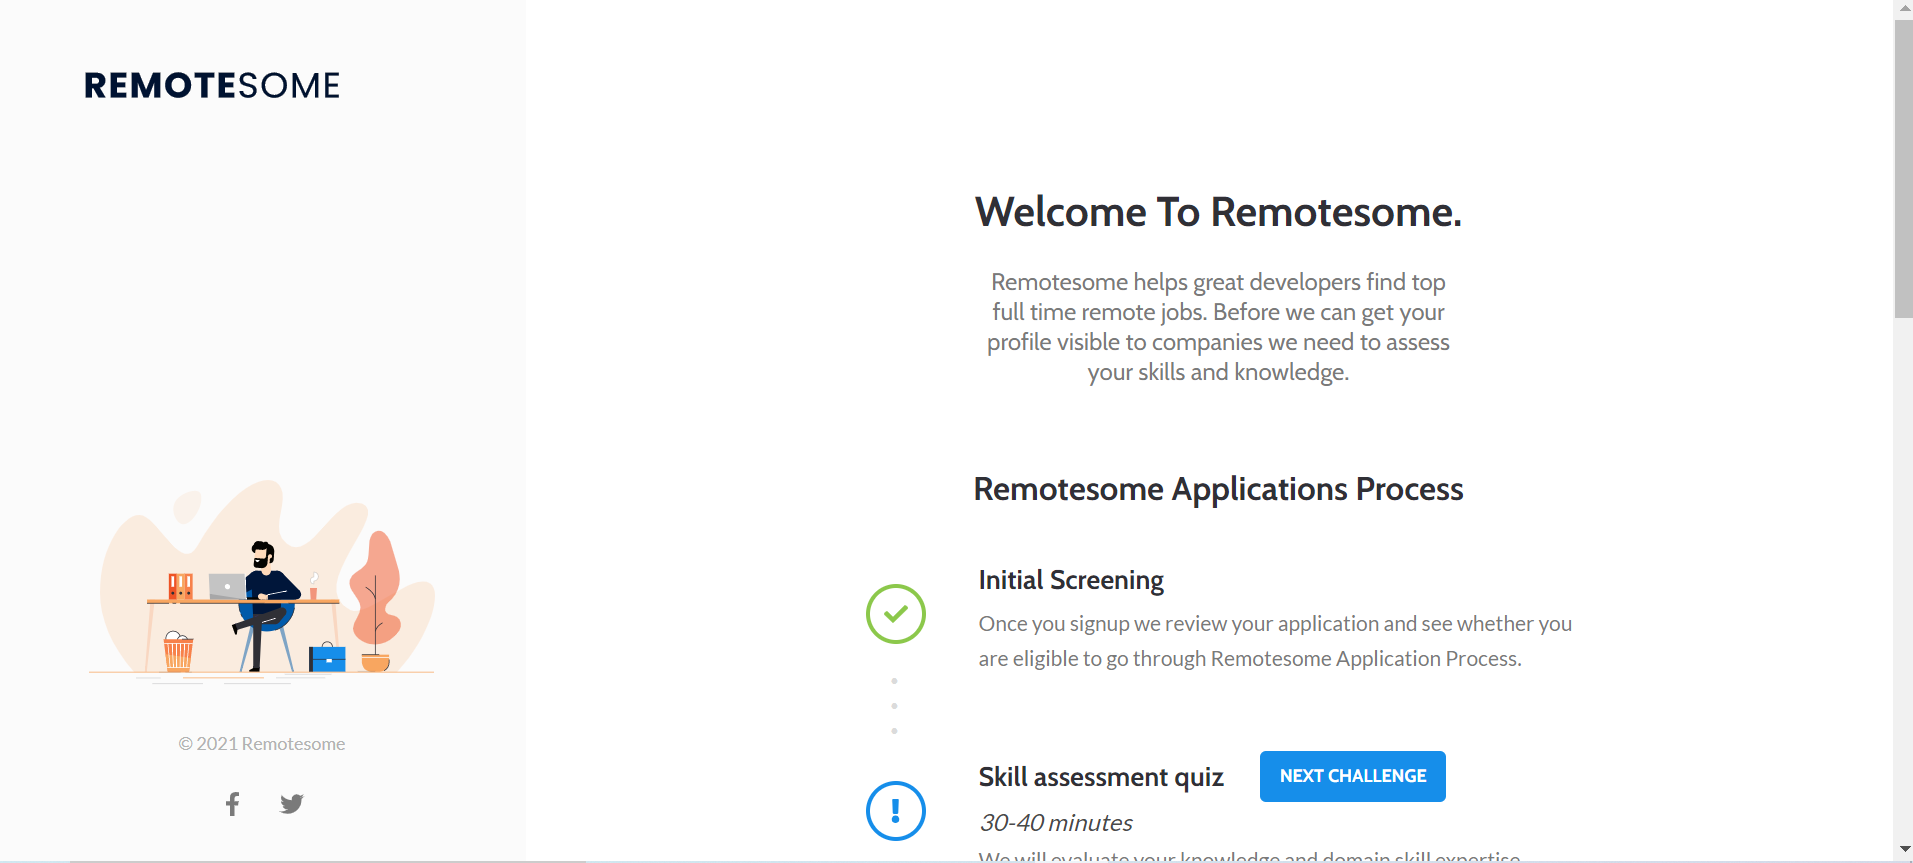 Get feedback from a vast remote working audience about Remotesome